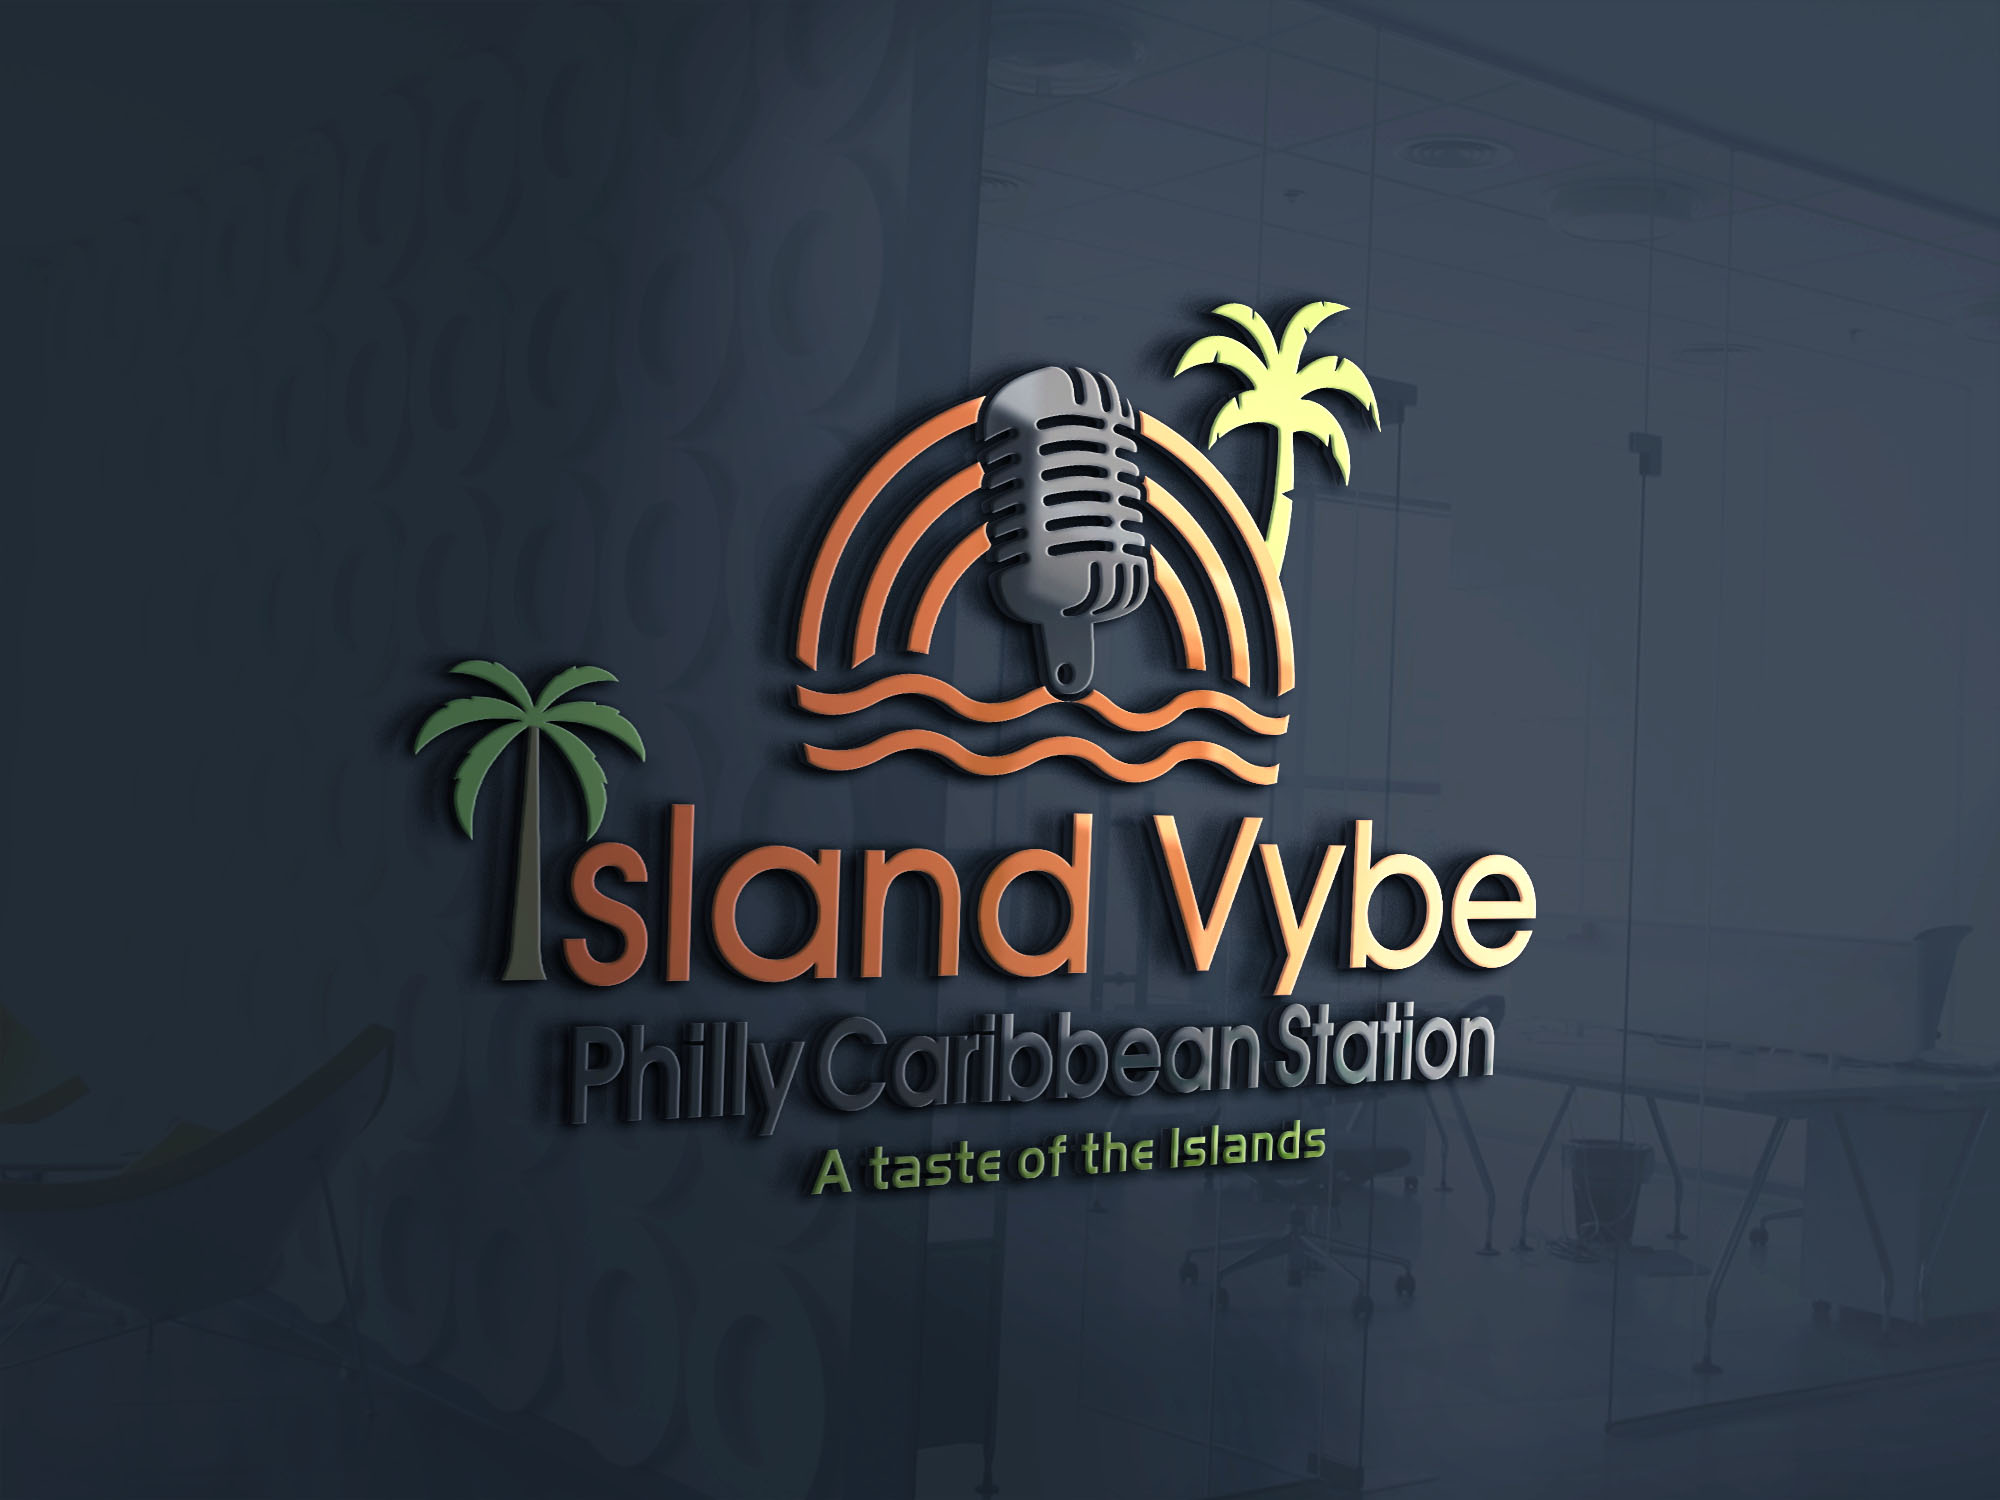 Island Vybe! Site